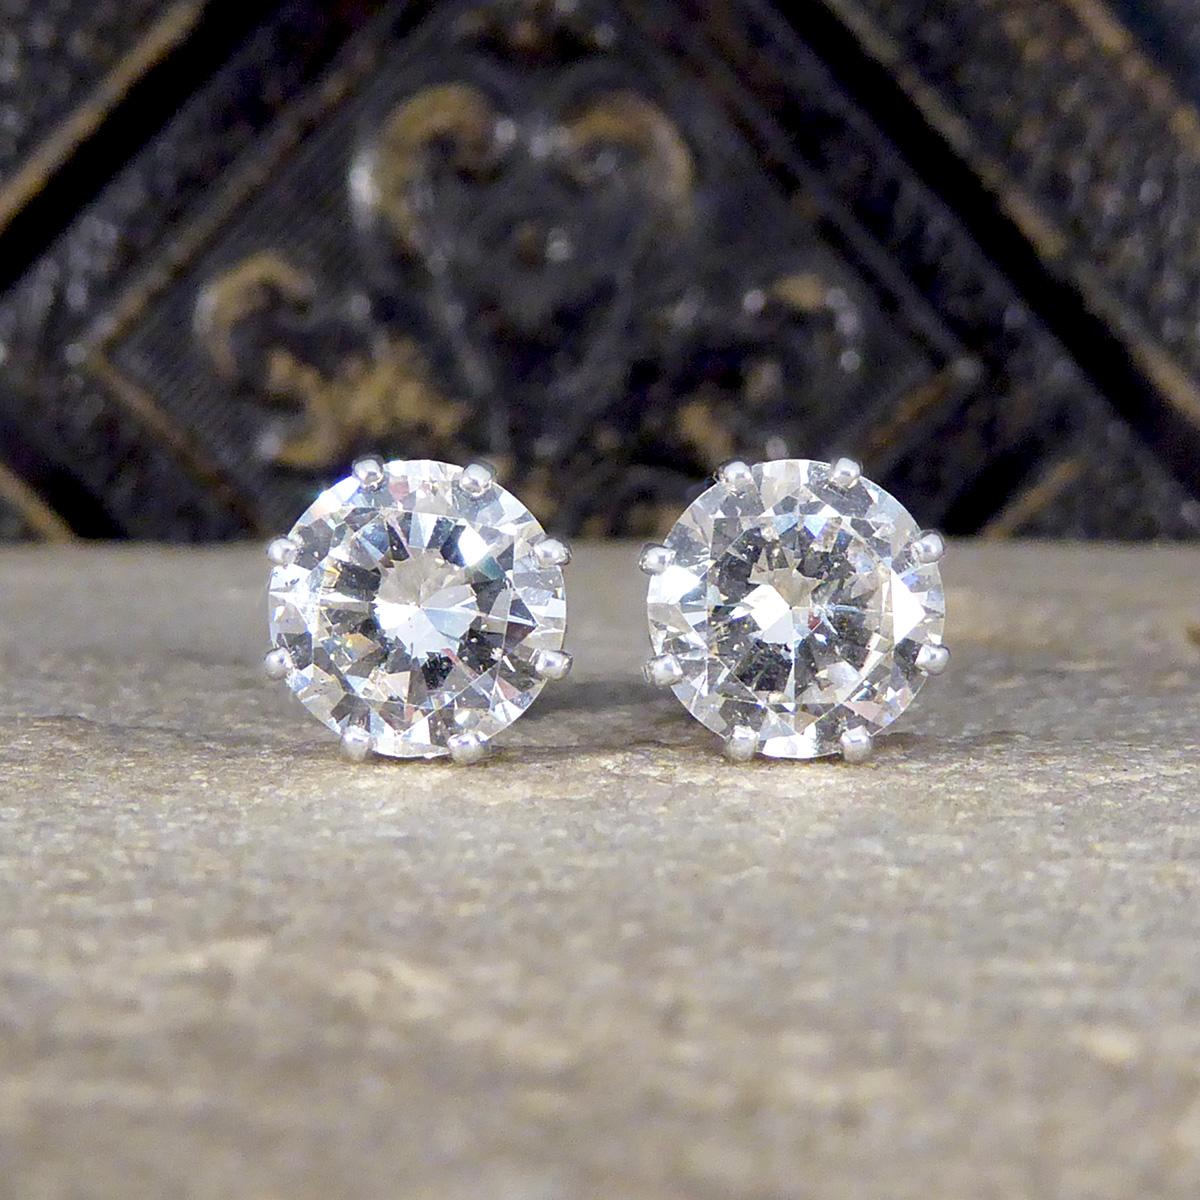 The perfect pair of big Diamond stud earrings. Each stud is set with a Round Brilliant Cut Diamond, matching well in colour and clarity and weighing a total of 3.82ct. The Diamonds each have an Anchor Cert Diamond report with with one 1.91ct graded